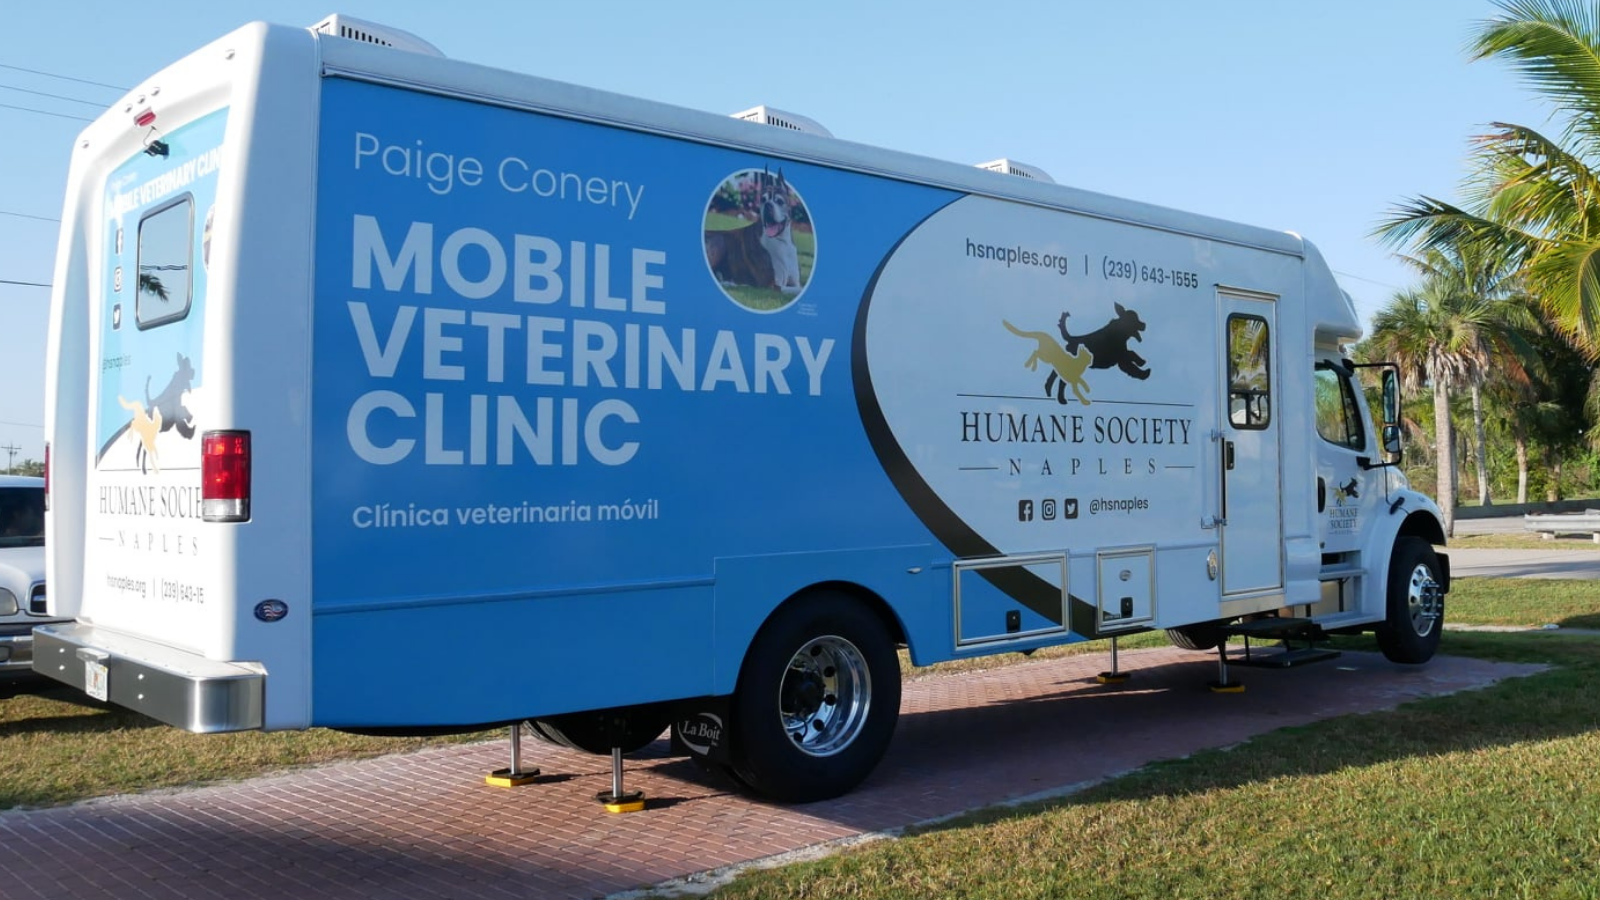 Paige Conery Mobile Veterinary Clinic